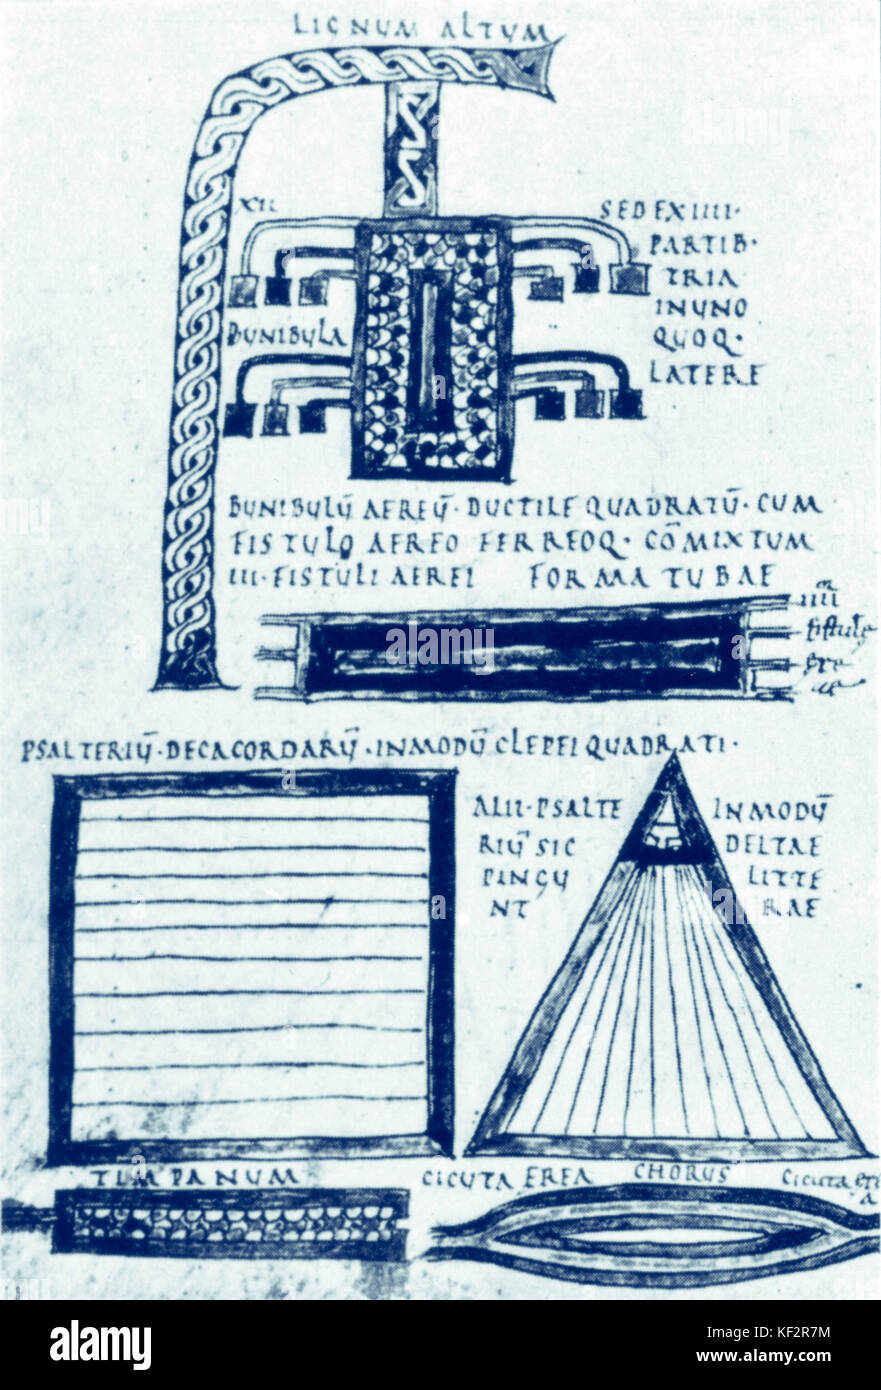 Anicius Manlius Severinus Boethius. Page from his treatise 'De Musica' showing various instruments, including 10 stringed psaltery. Roman philosopher and theorist (475-524). Stock Photo